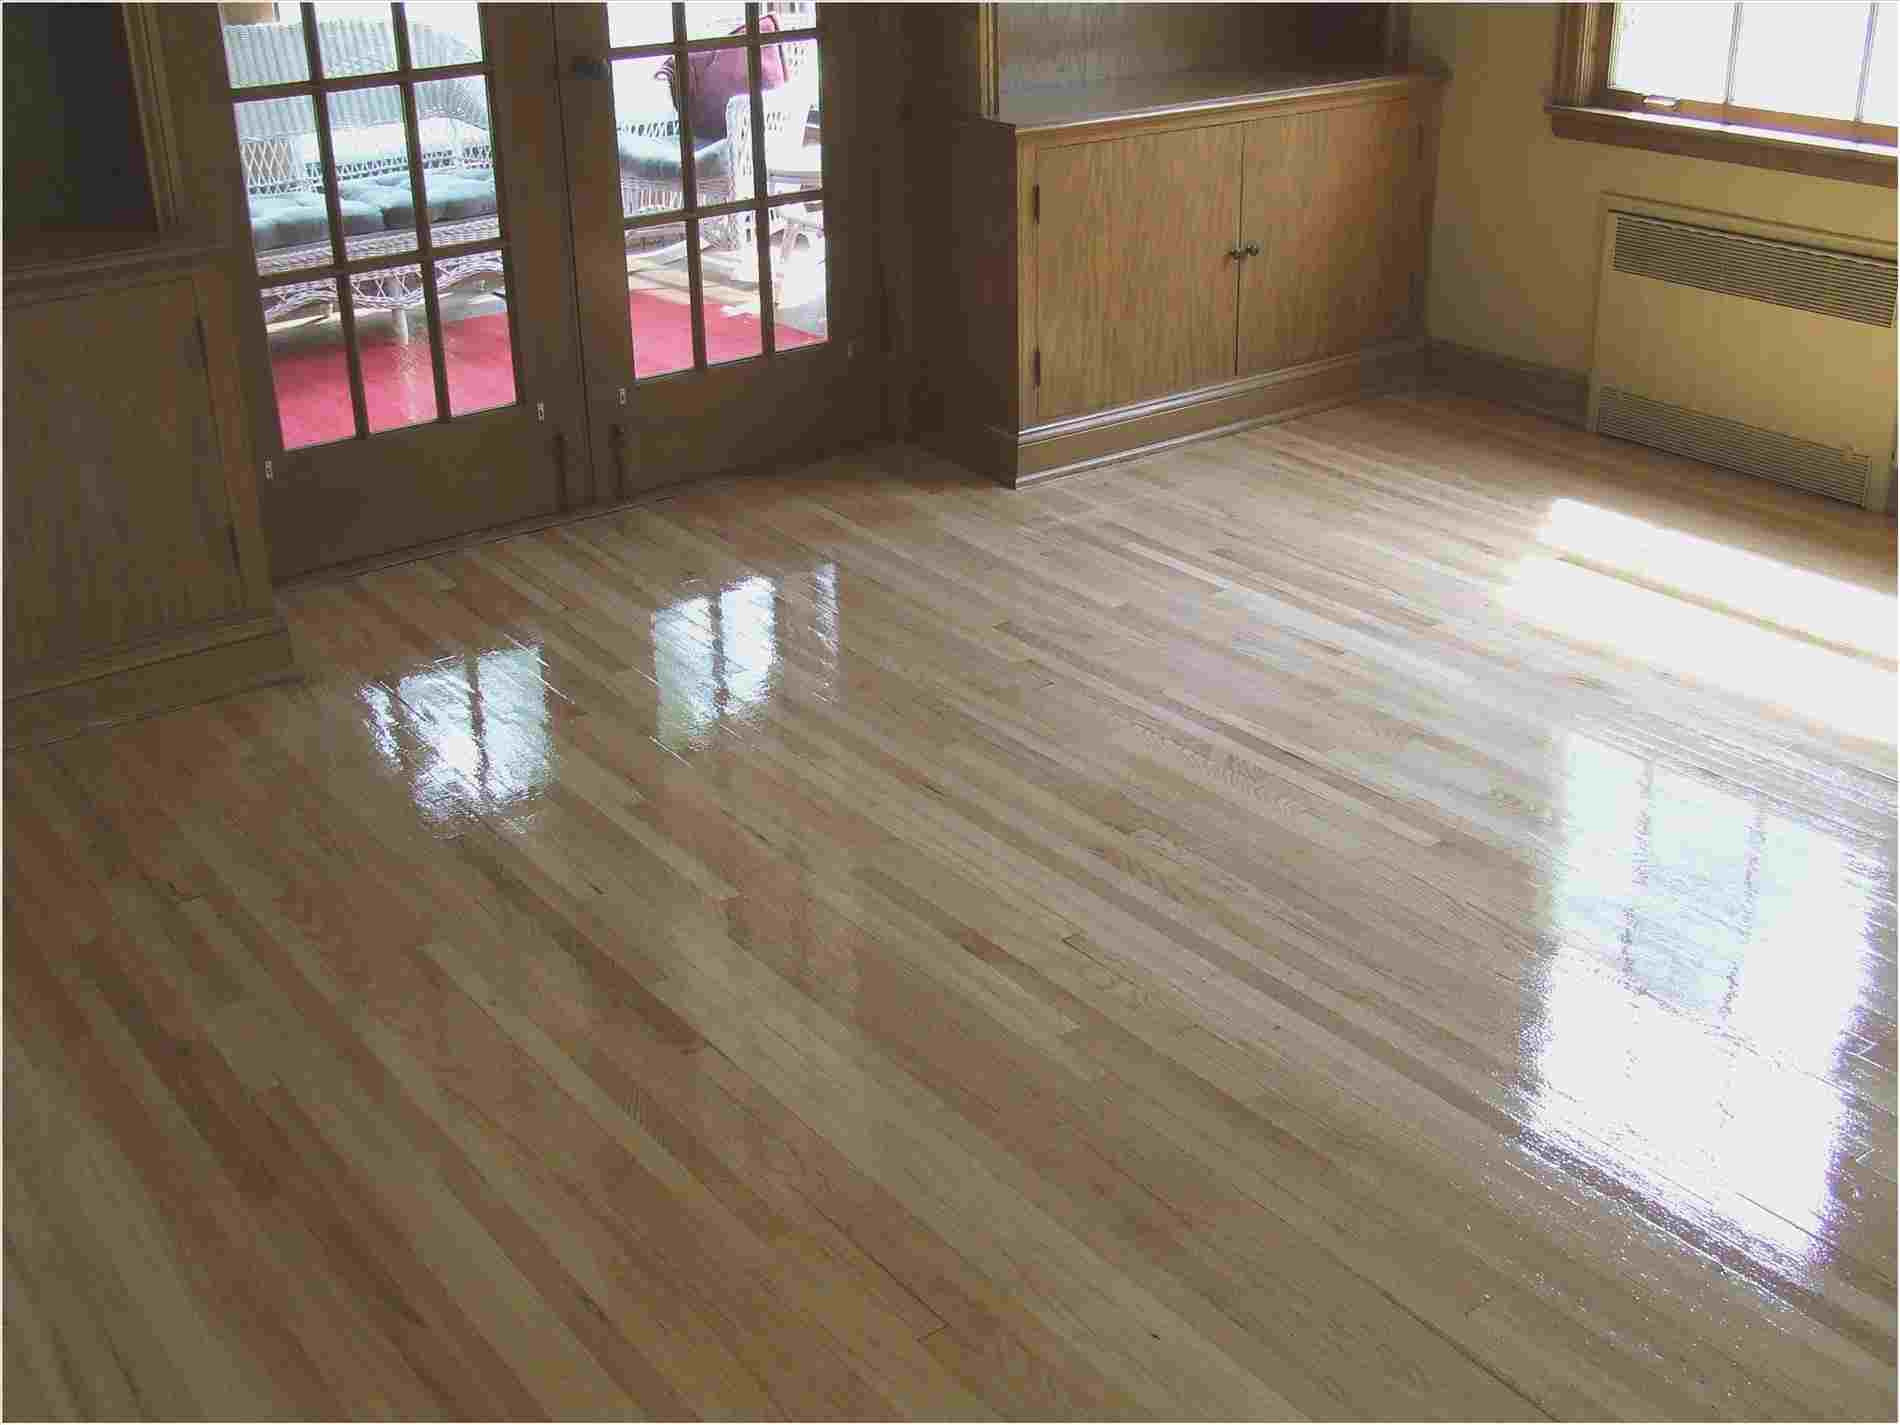 23 Awesome How Do You Clean Hardwood Floors with Vinegar 2024 free download how do you clean hardwood floors with vinegar of image of wooden floors vinegar removing scratches from a wood floor for flooring natural wood floor maintenance natural wood flooring